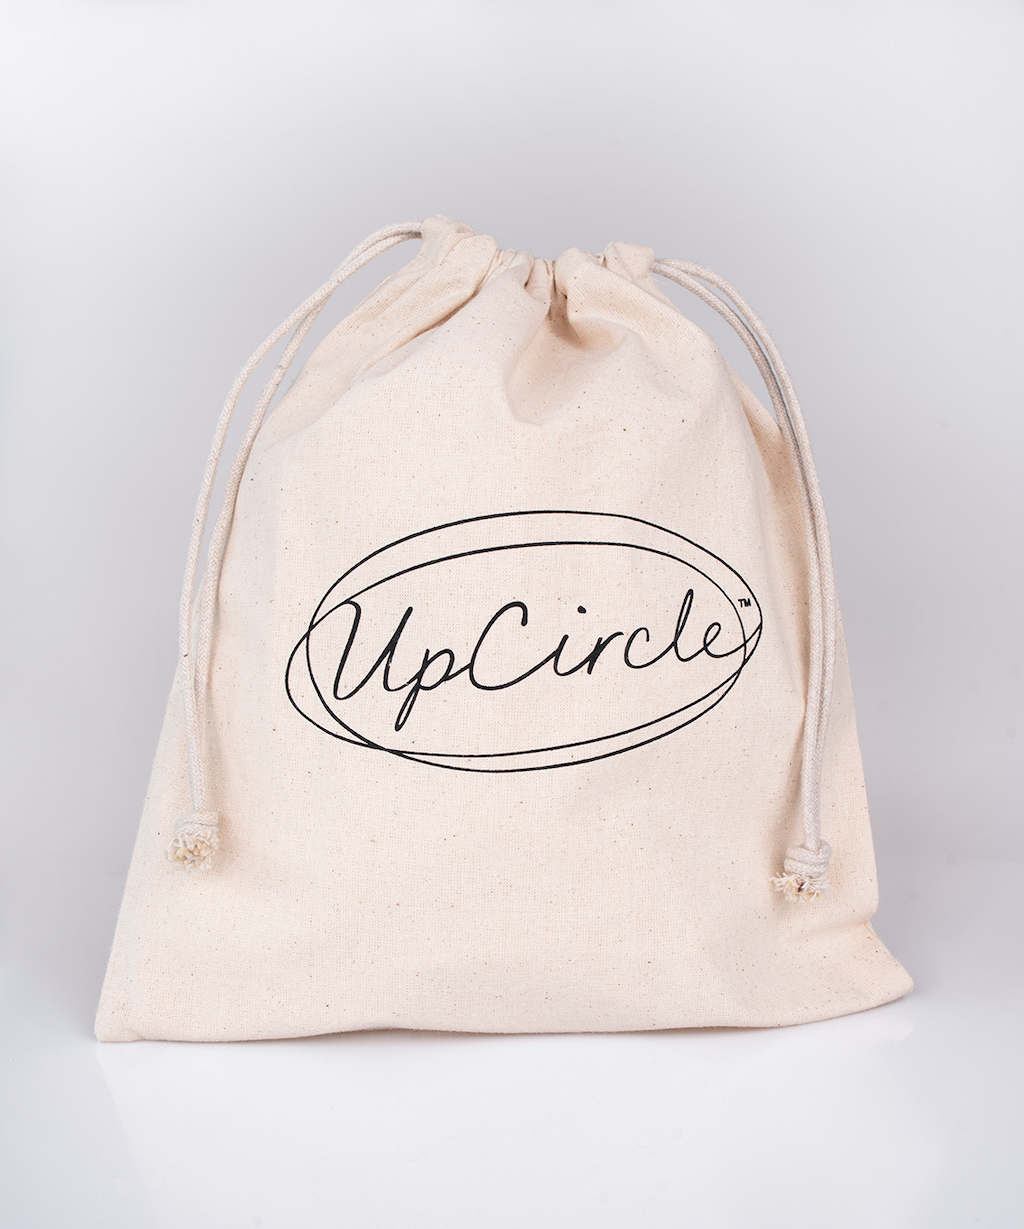 white linen bag with a drawstring which features the upcircle logo in a scrolling black font. 